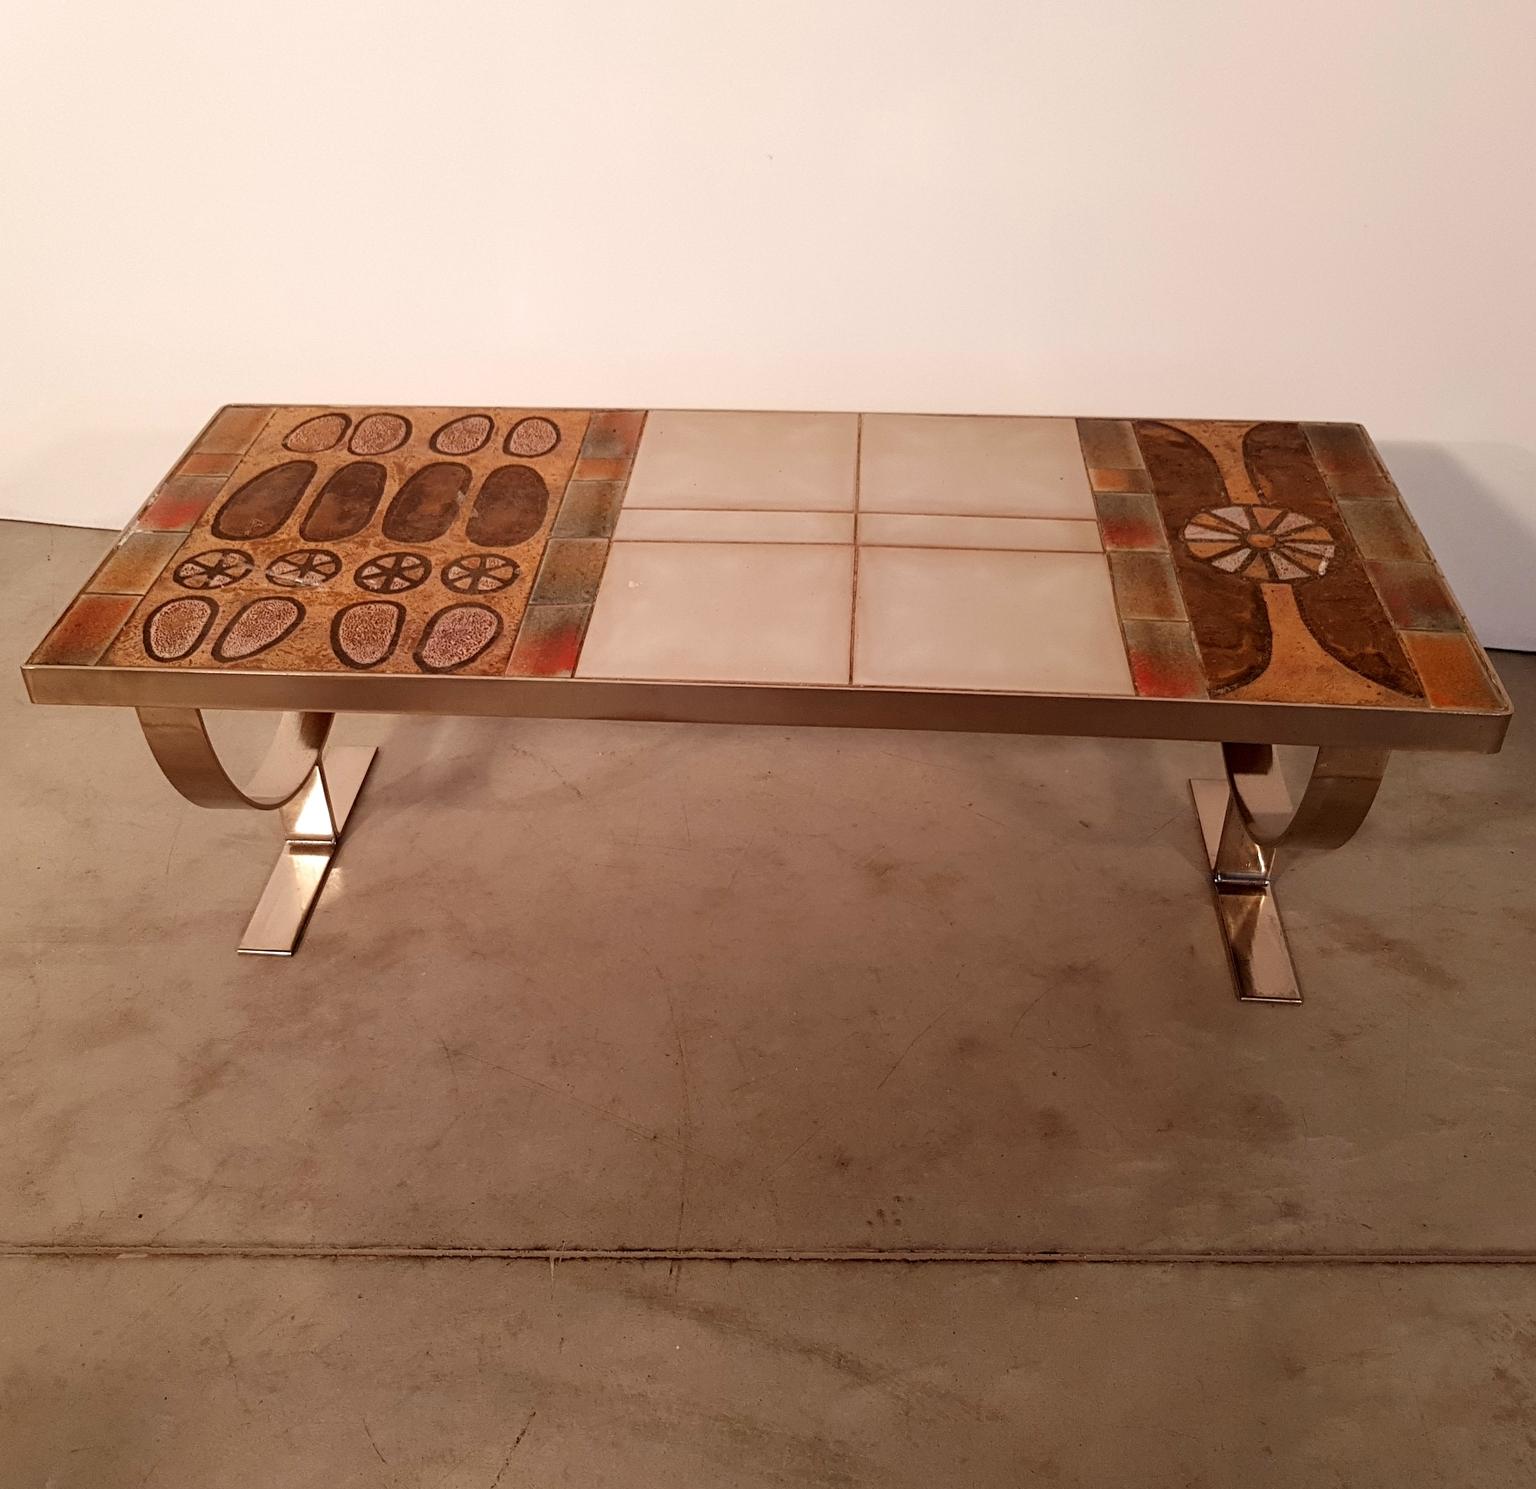 French Ceramic-Top Midcentury Coffee Table with Chrome Legs, France, 1970s For Sale